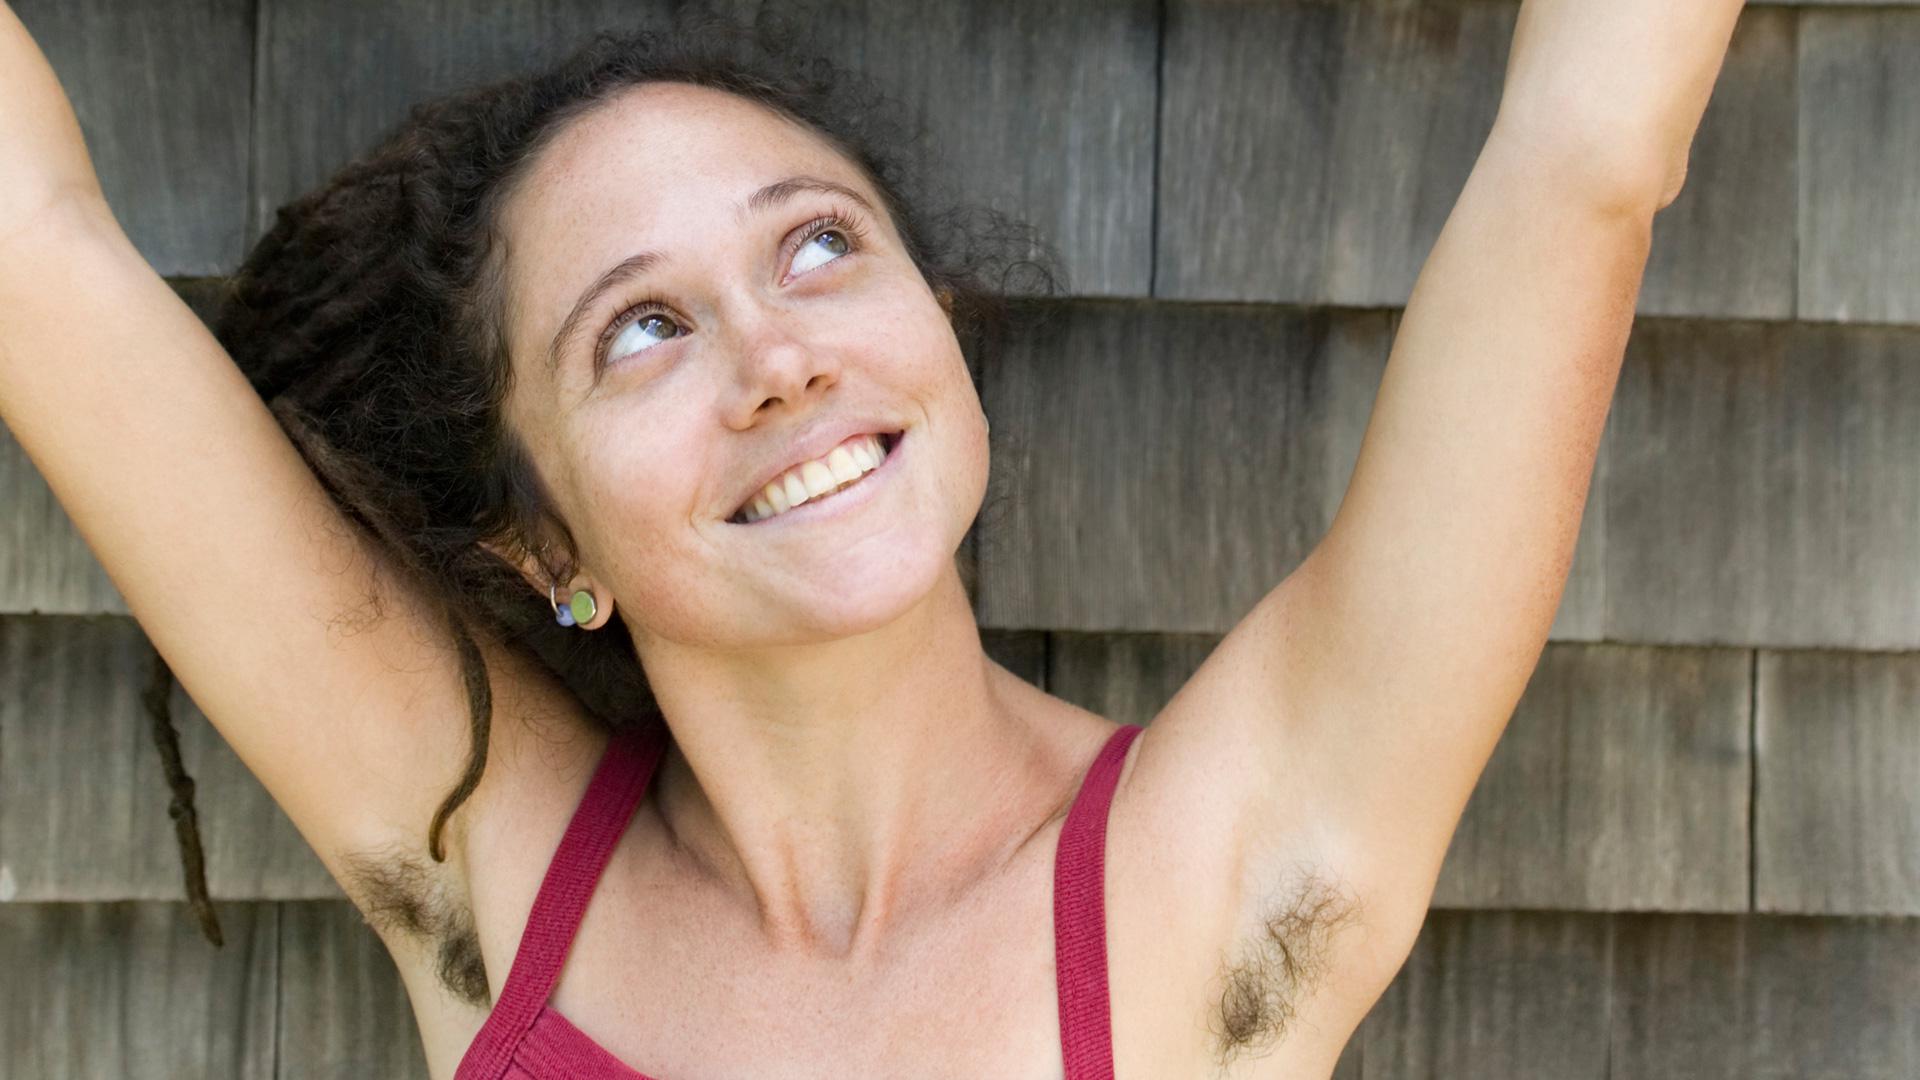 a girl posing and showing her armpit hair